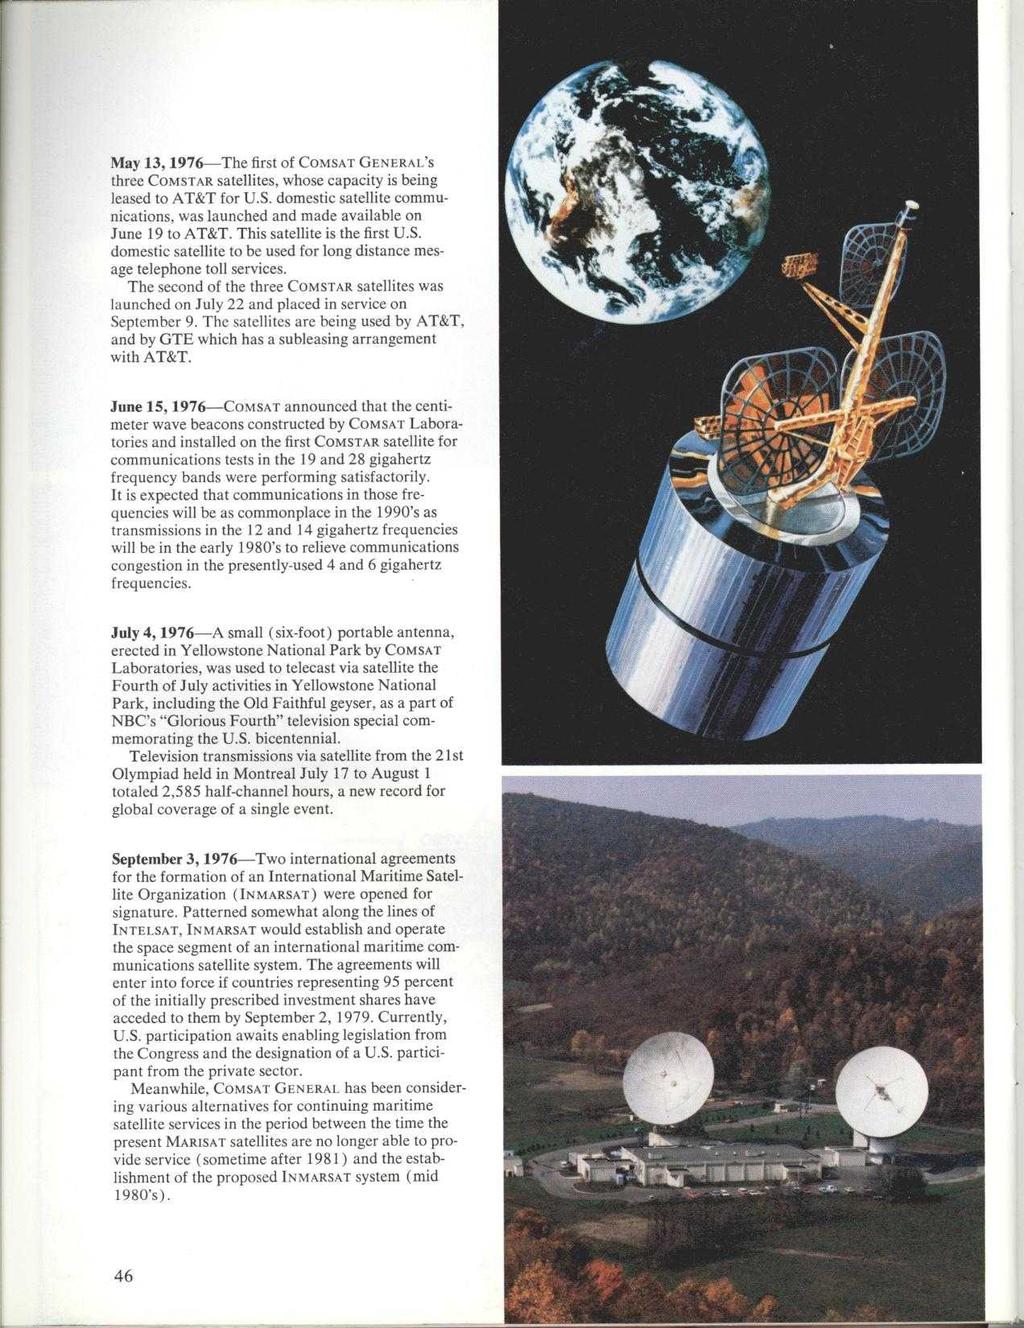 May 13, 1976-The first of COMSAT GENERAL'S three COMSTAR satellites, whose capacity is being leased to AT&T for U.S. domestic satellite communications, was launched and made available on June 19 to AT&T.